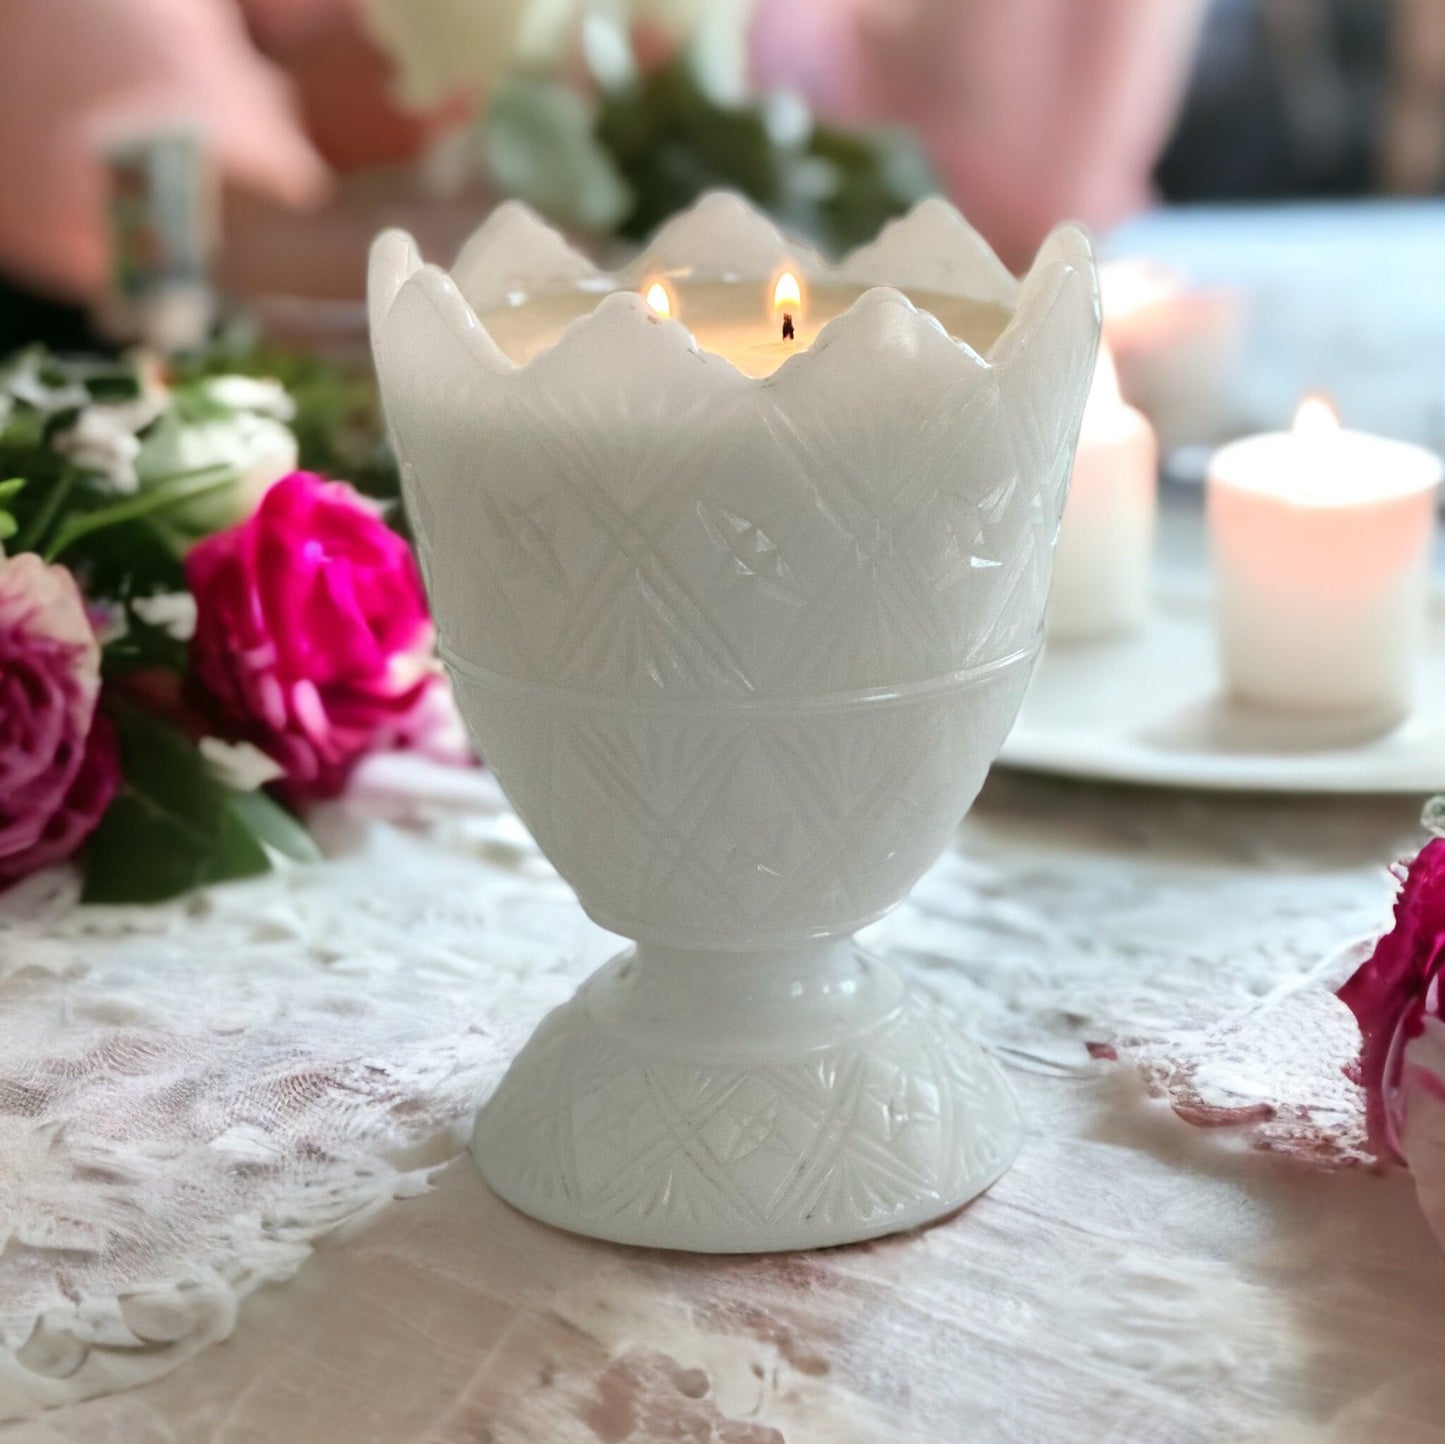 E.O. Brody Vintage Milk Glass Planter Candle with Custom Scents